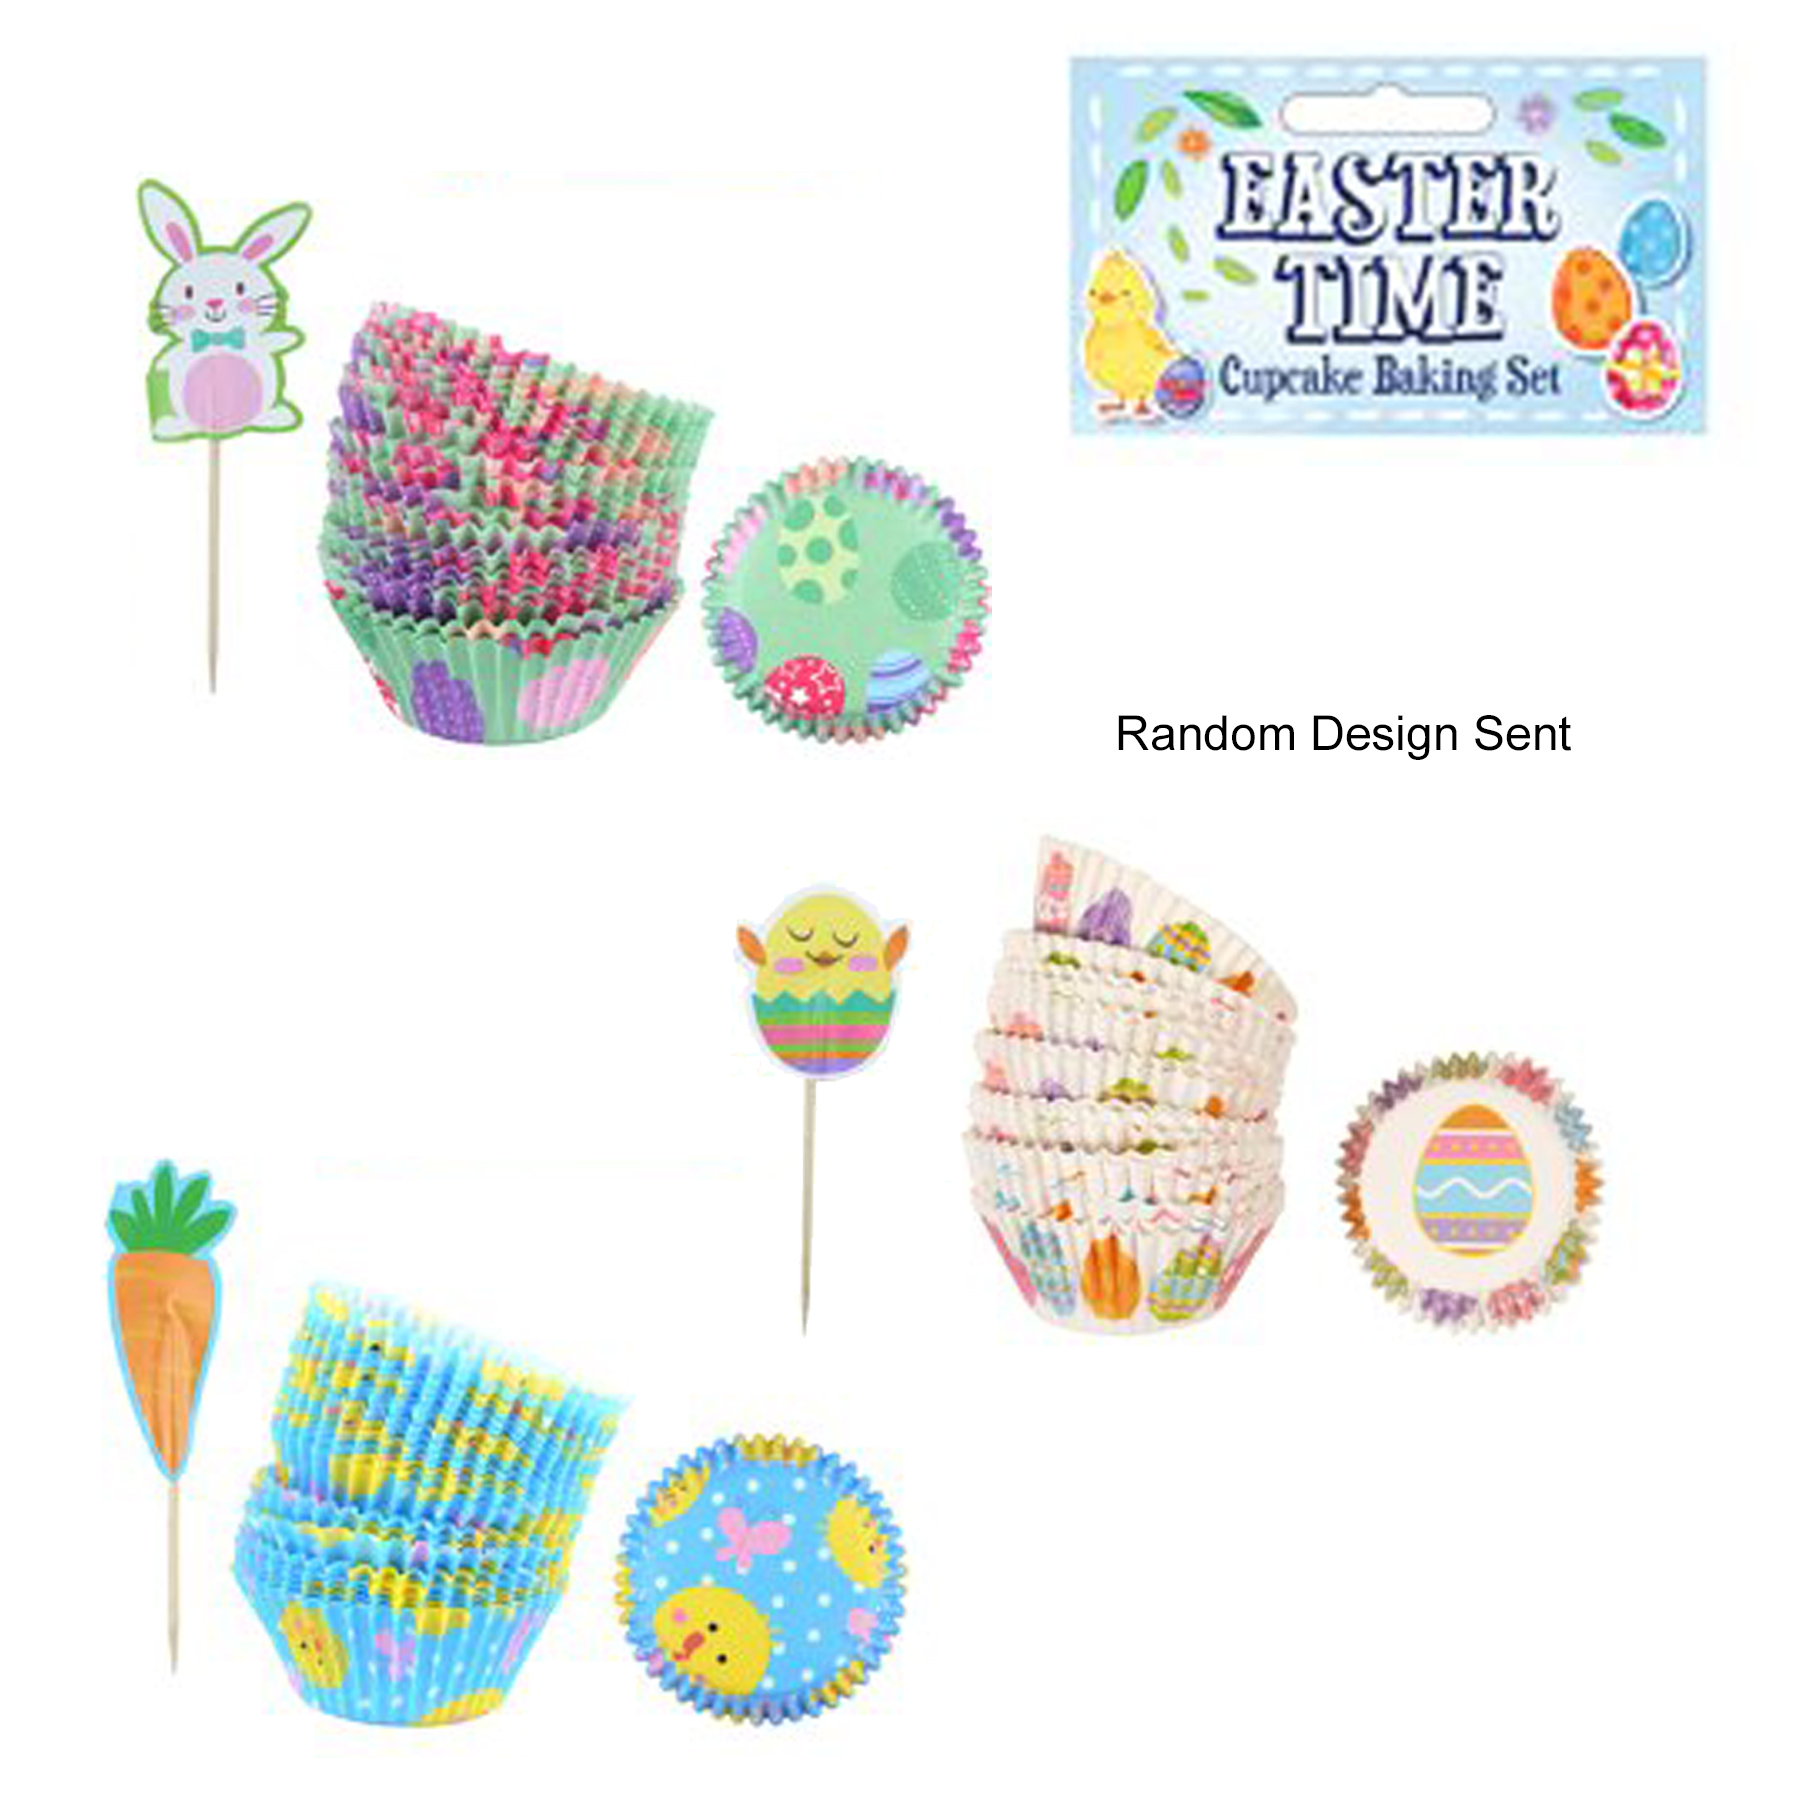 Easter Kitchen - Cupcake Set - Cake Cases and Toppers Random Design Sent